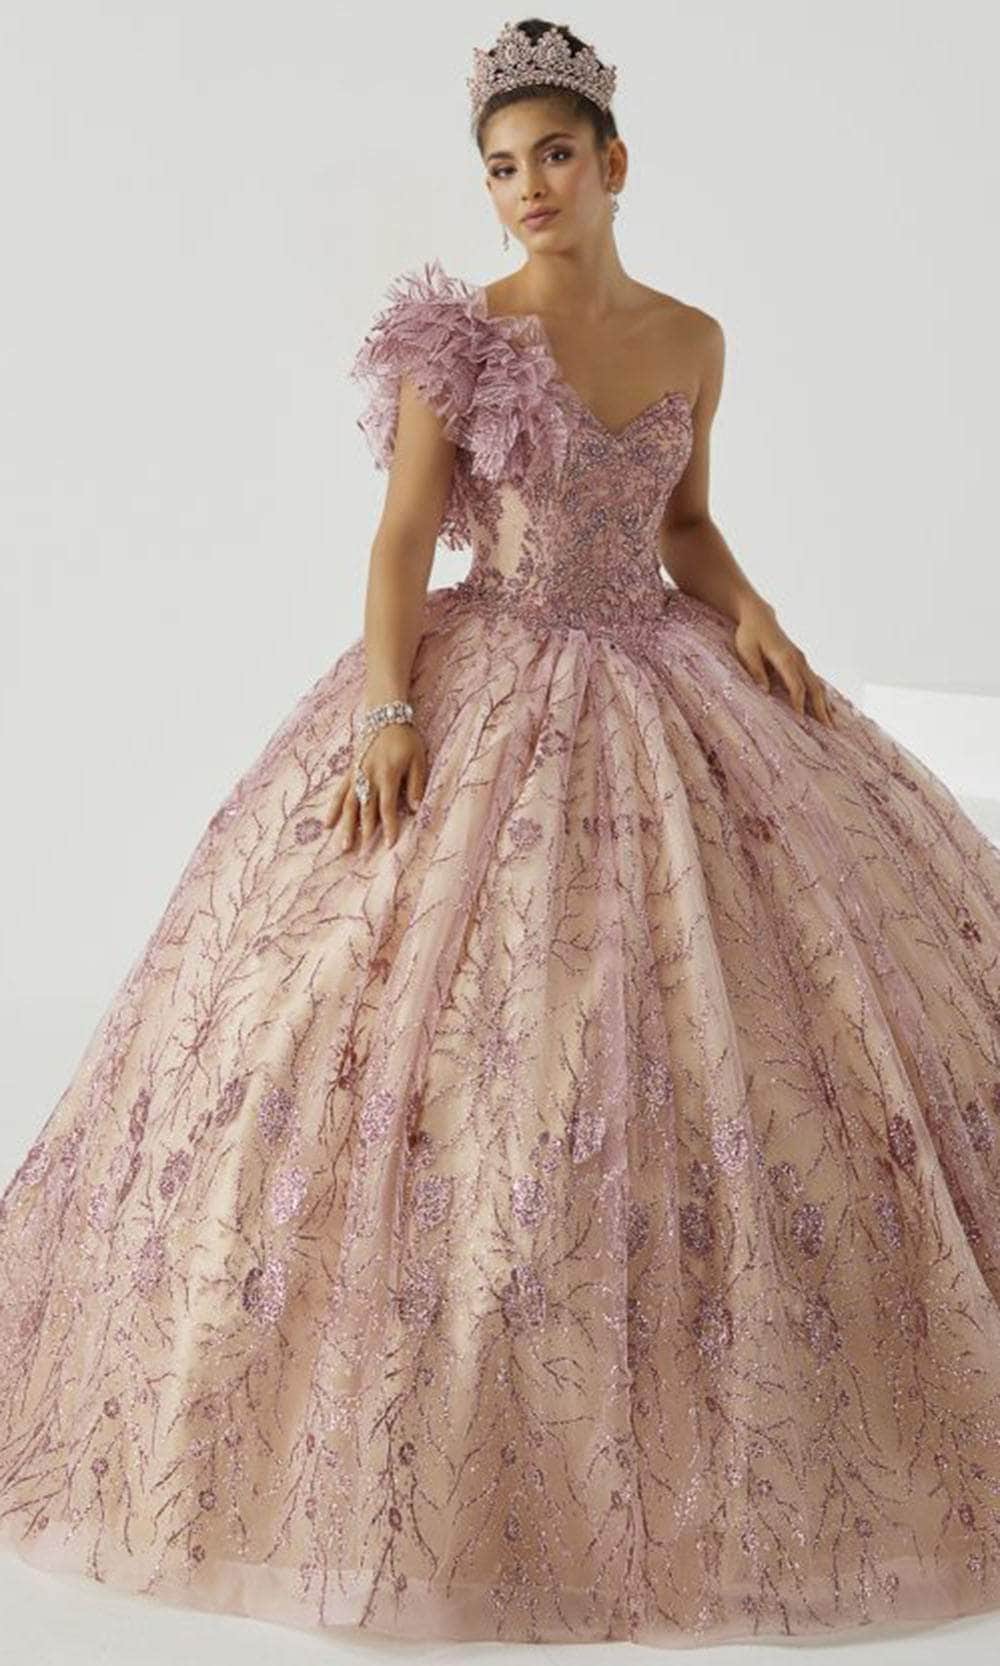 Image of Fiesta Gowns - 56440 Ruffled One Shoulder Ballgown